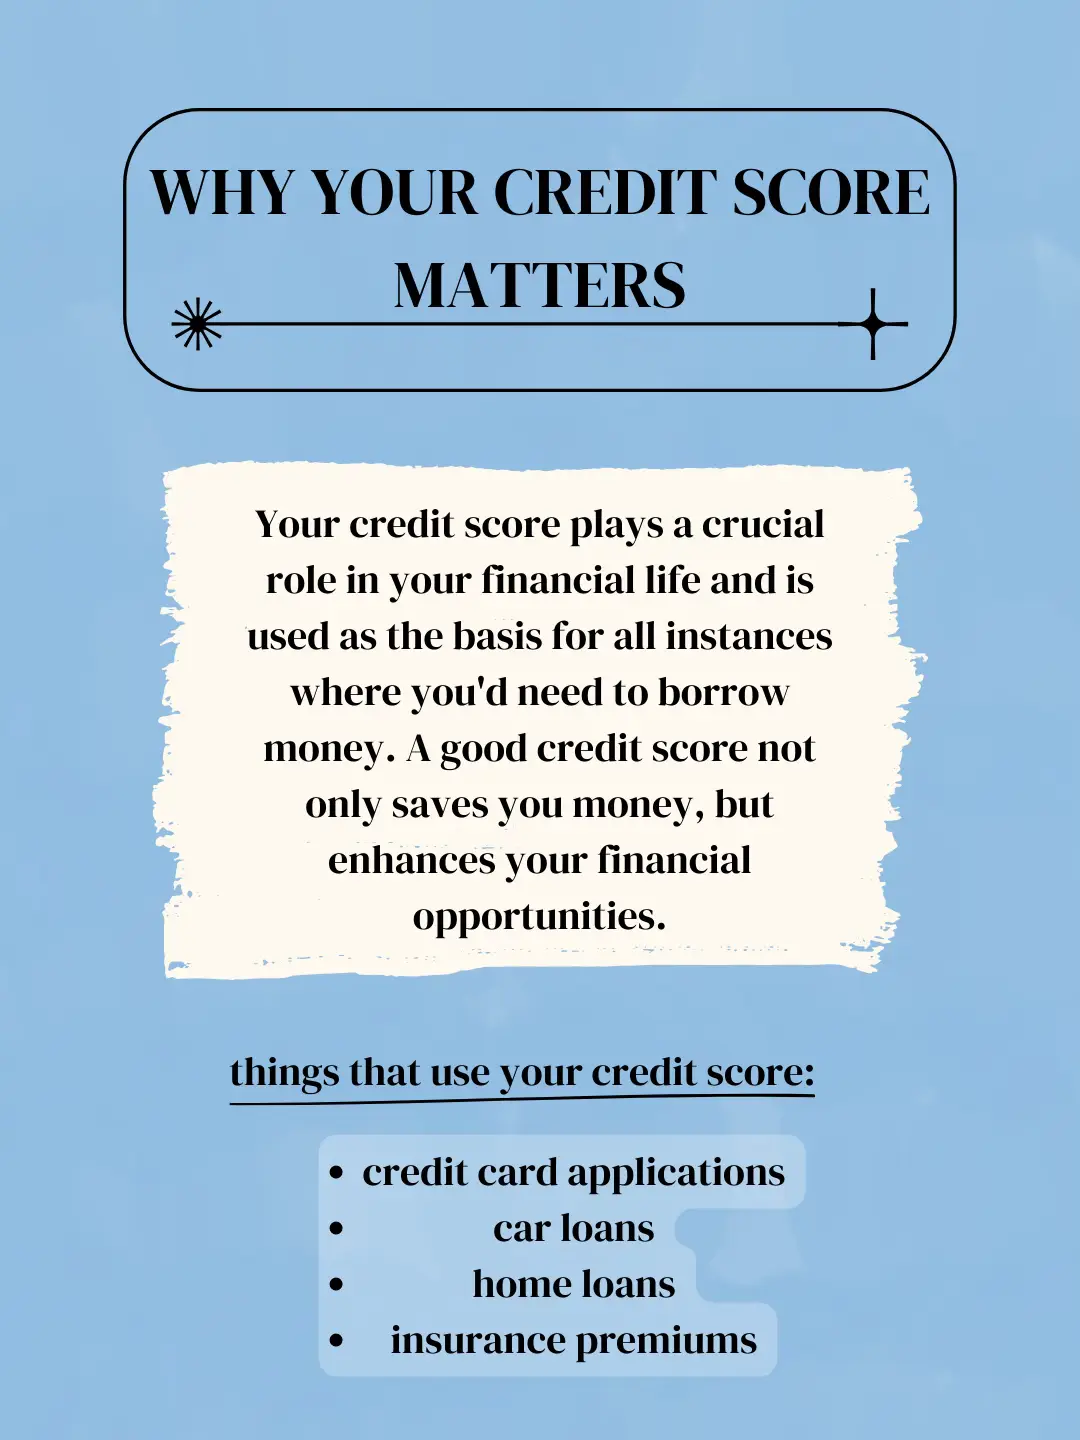 Your Credit Score: What is it and Why it Matters